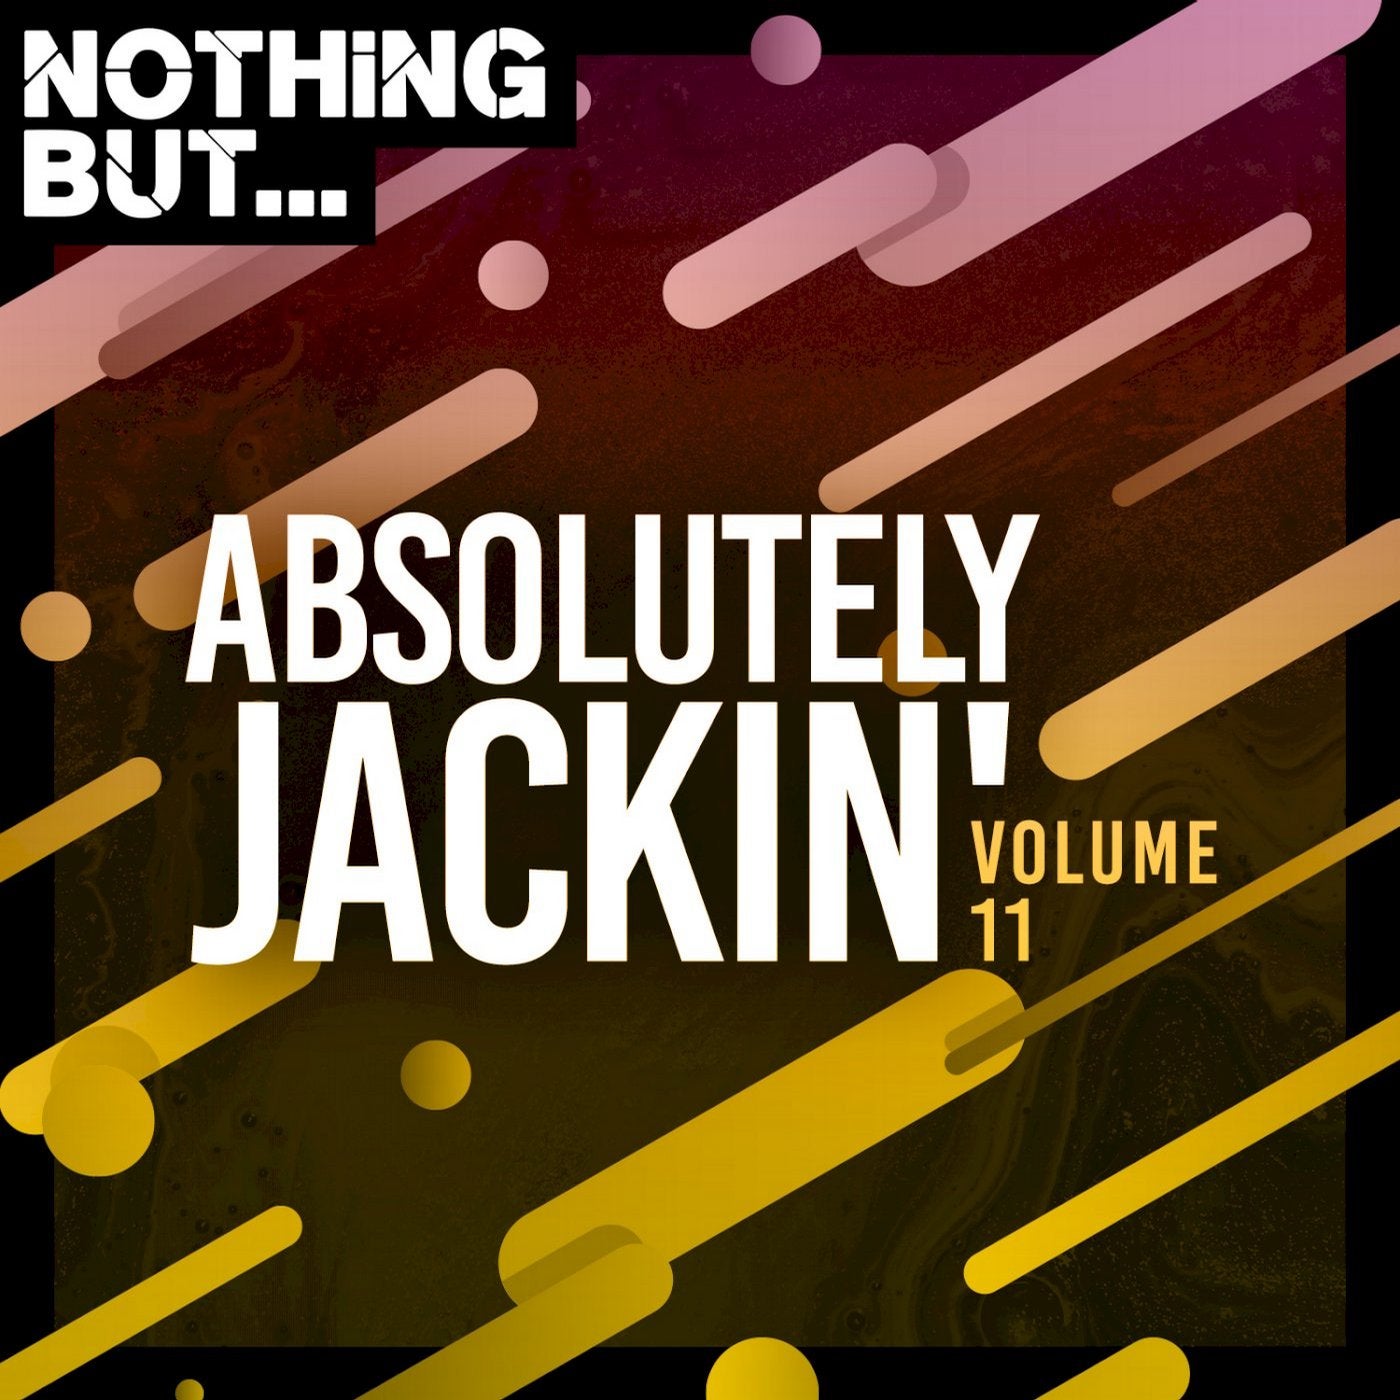 Nothing But... Absolutely Jackin', Vol. 11